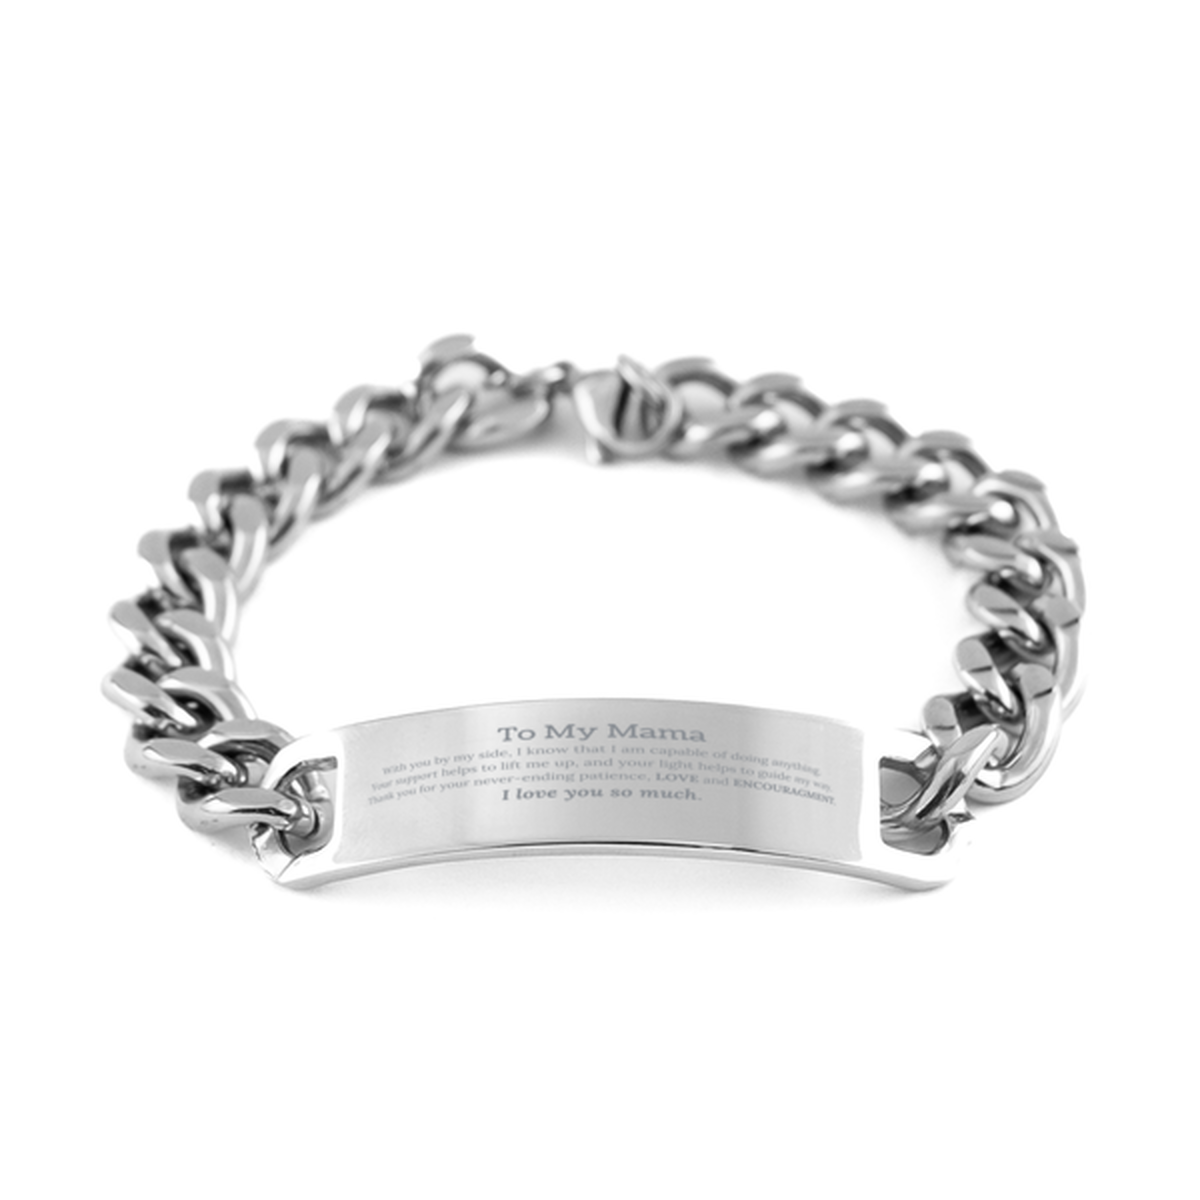 Appreciation Mama Cuban Chain Stainless Steel Bracelet Gifts, To My Mama Birthday Christmas Wedding Keepsake Gifts for Mama With you by my side, I know that I am capable of doing anything. I love you so much